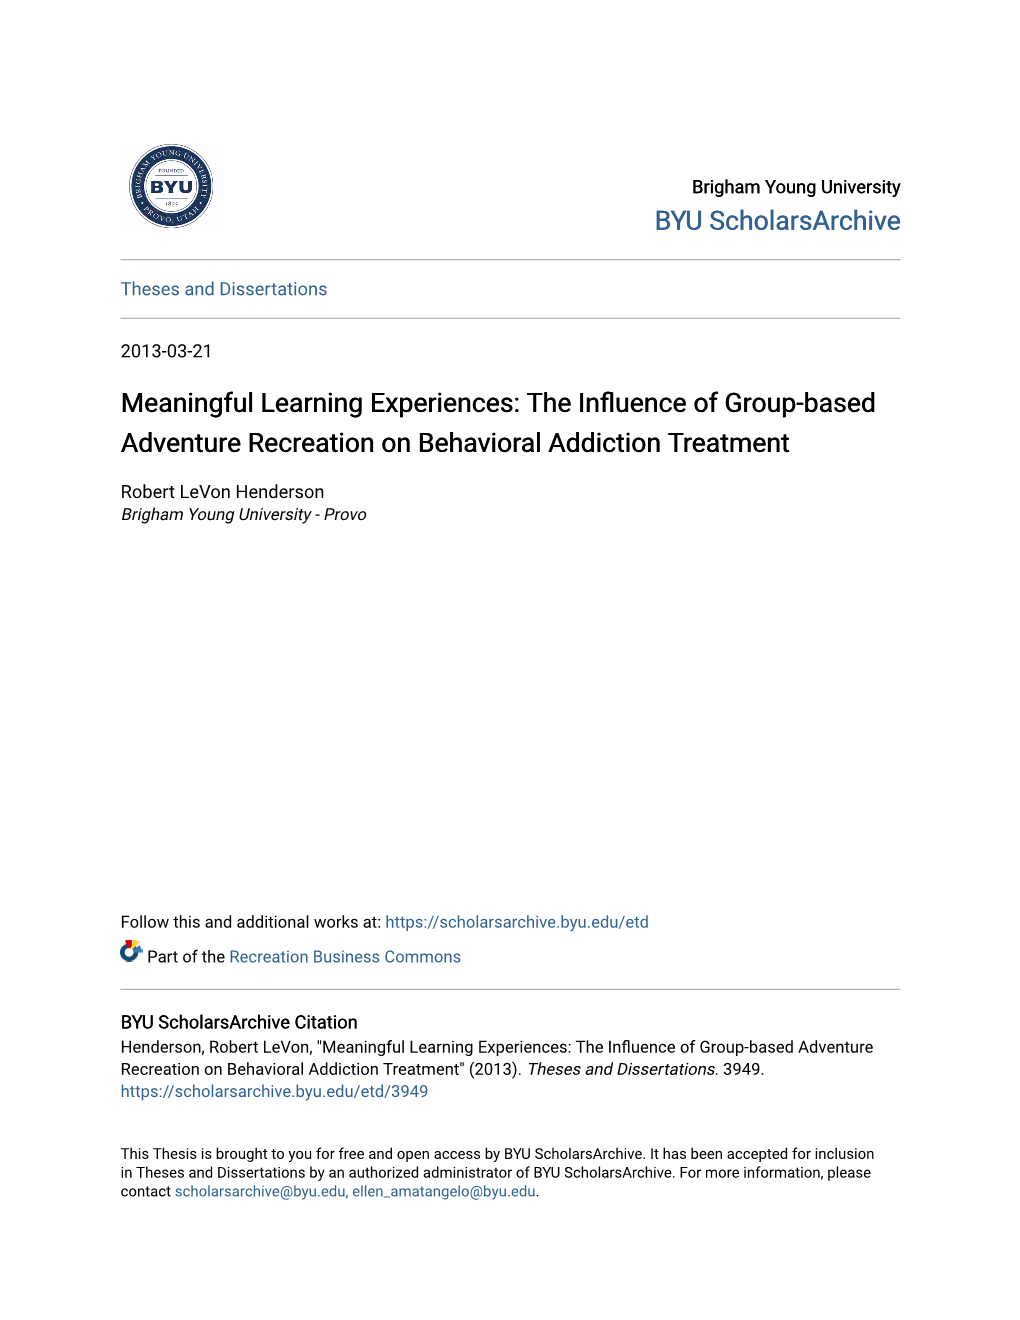 Meaningful Learning Experiences: the Influence of Group-Based Adventure Recreation on Behavioral Addiction Treatment